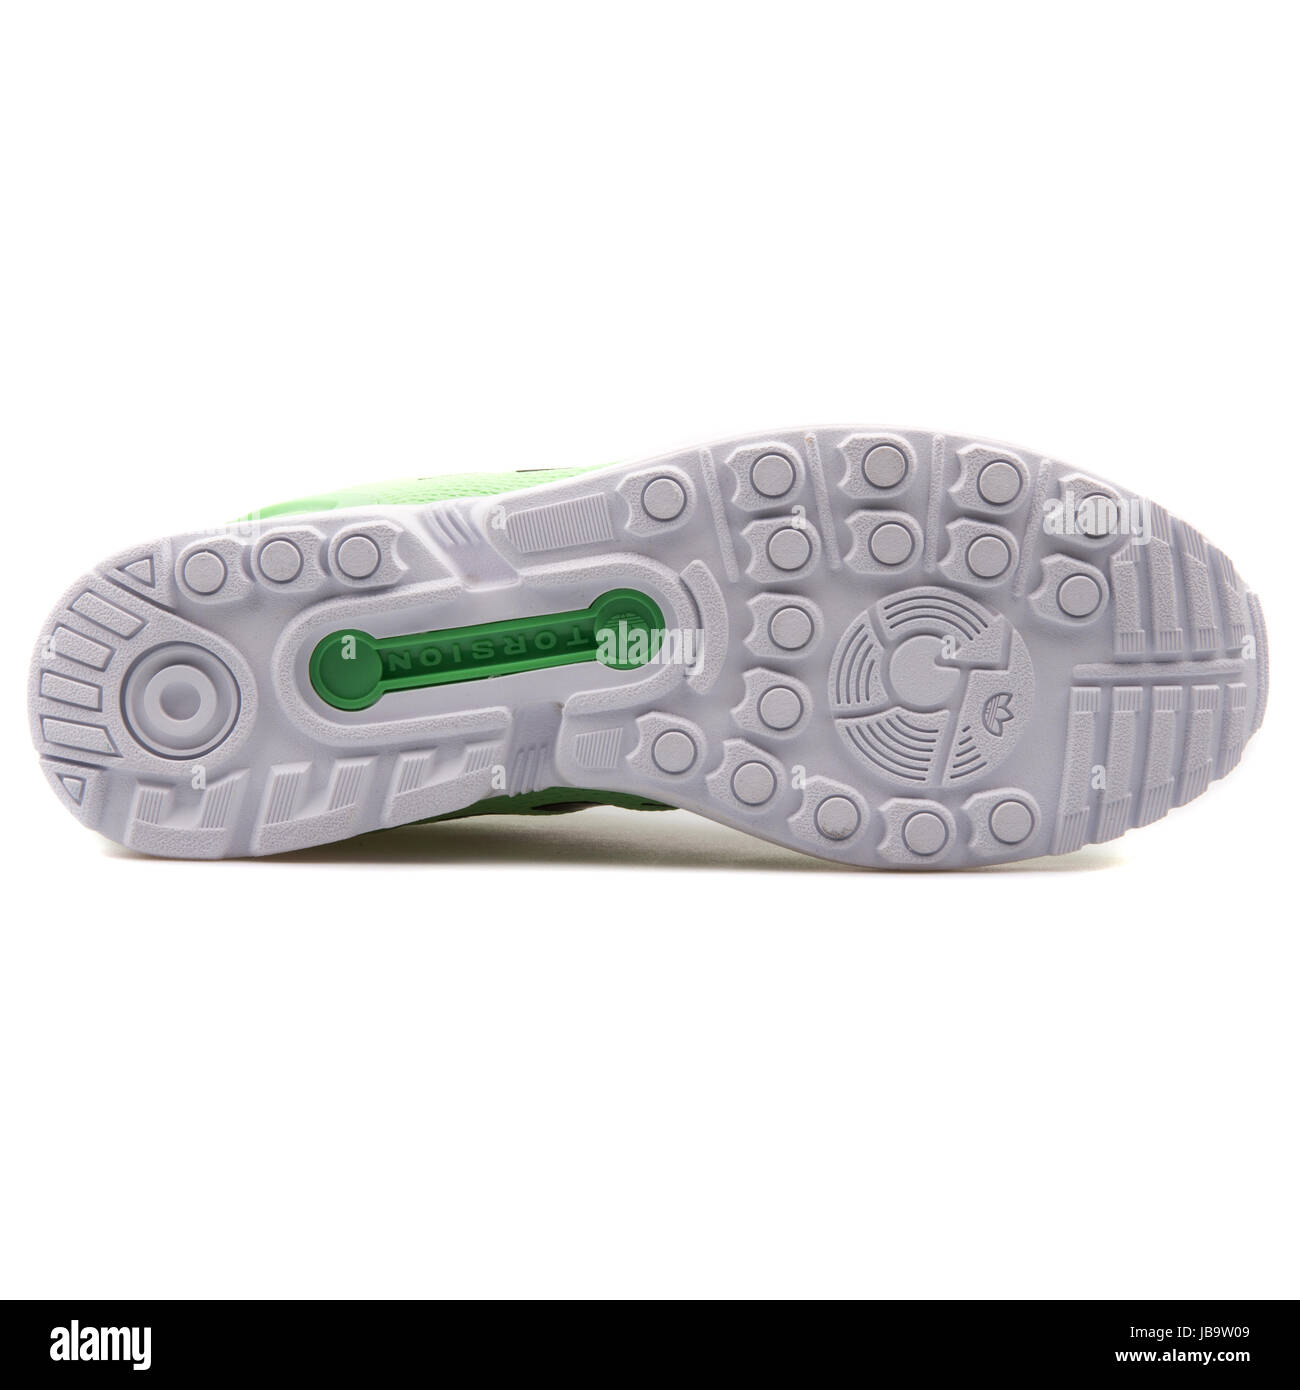 Adidas ZX Flux Green and White Men's Running Shoes - AF6345 Stock Photo -  Alamy